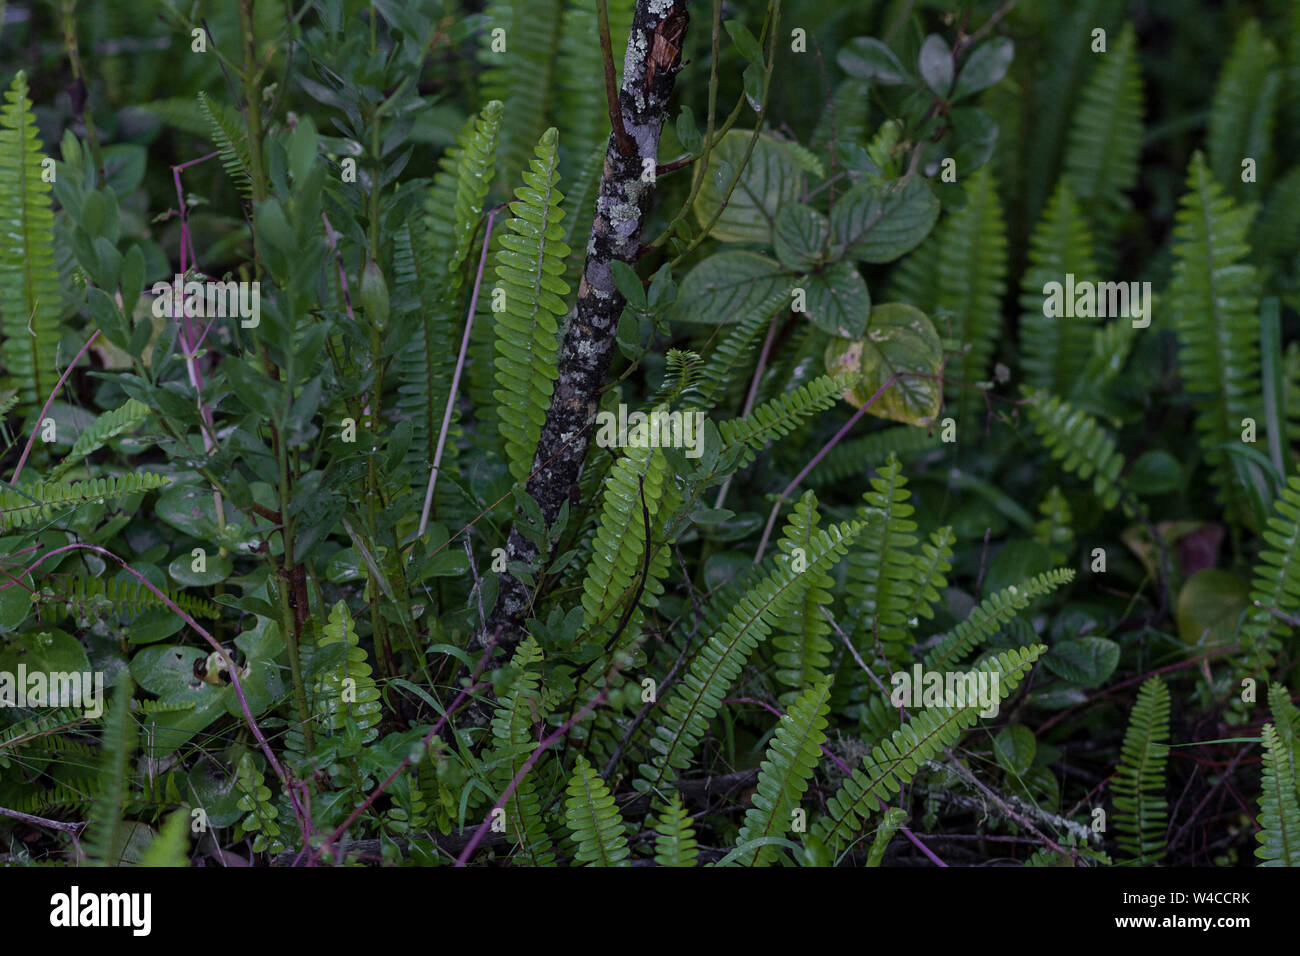 Cropped close up photo of forest floor vegetation Stock Photo